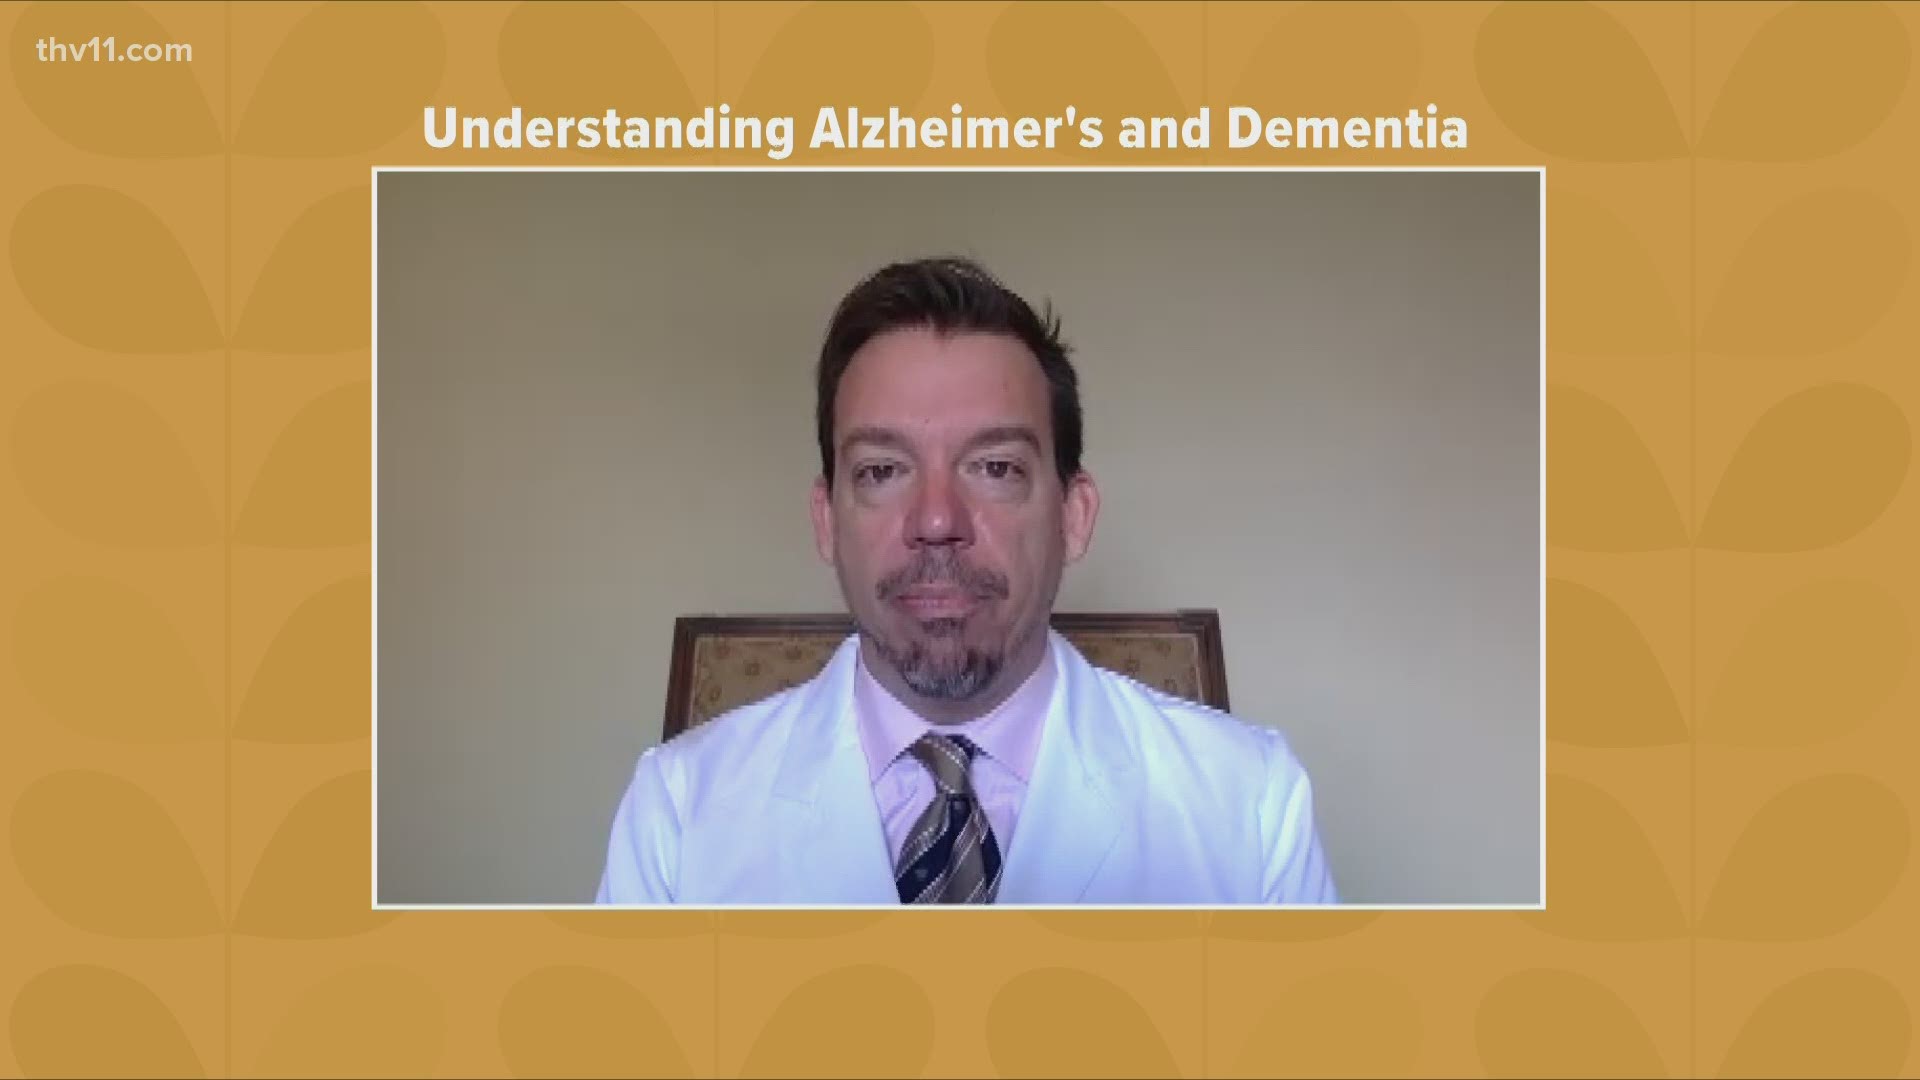 Dr. Morgan Sauer with Baptist Health Systems joins Theba Lolley for a conversation about understanding terminology associated with Alzheimer's and Dementia.